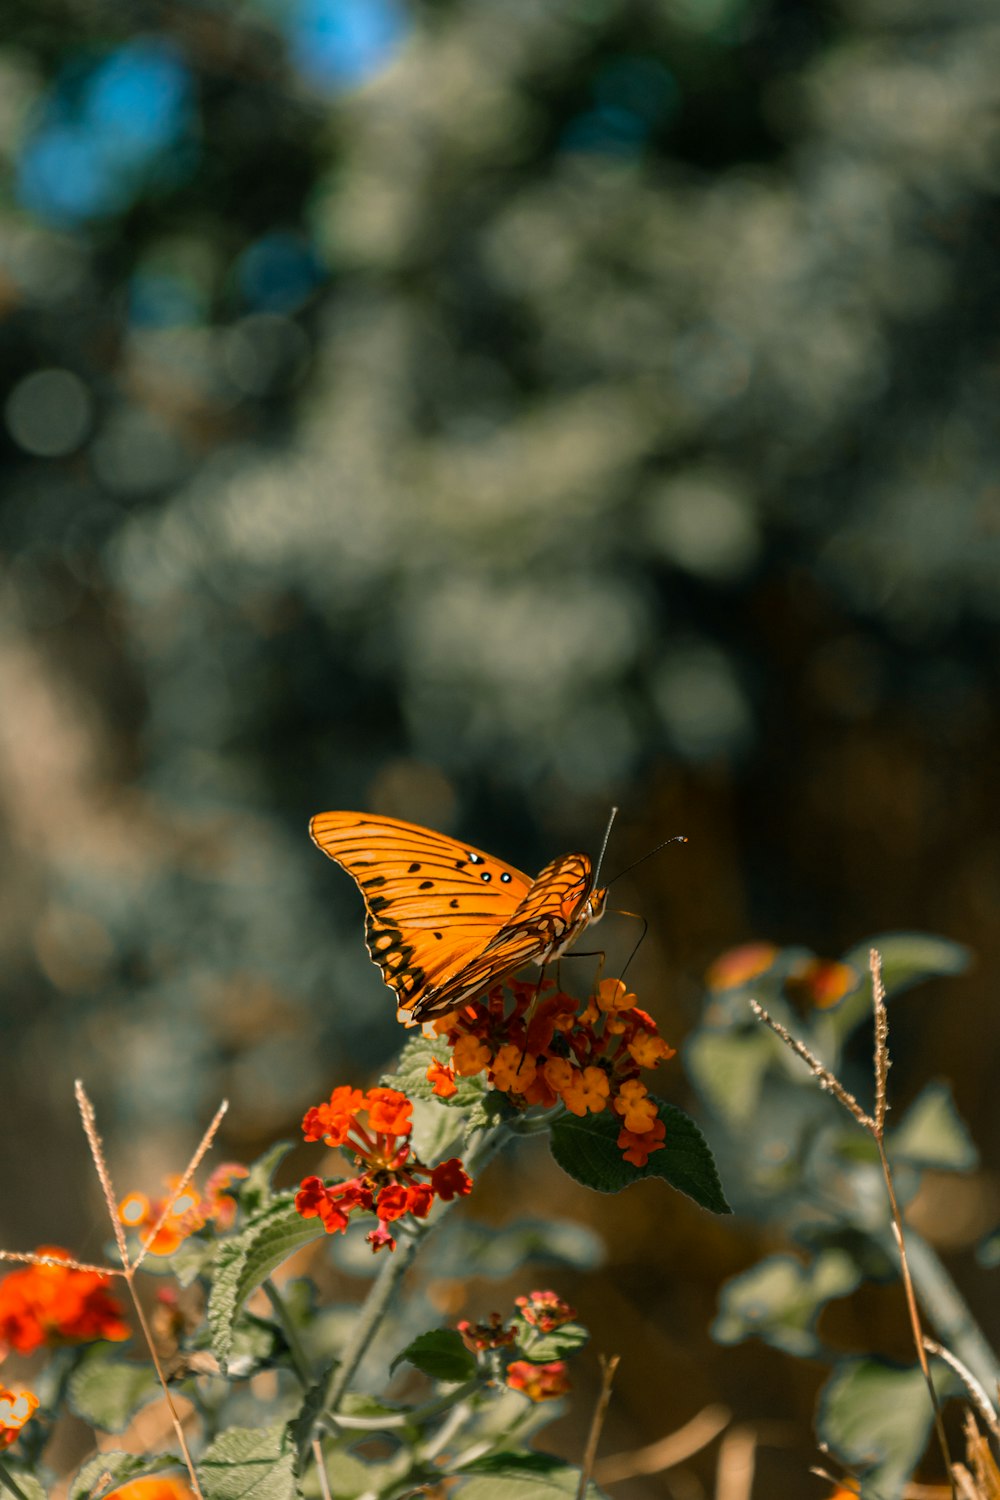 brown and black butterfly perched on orange flower in close up photography during daytime